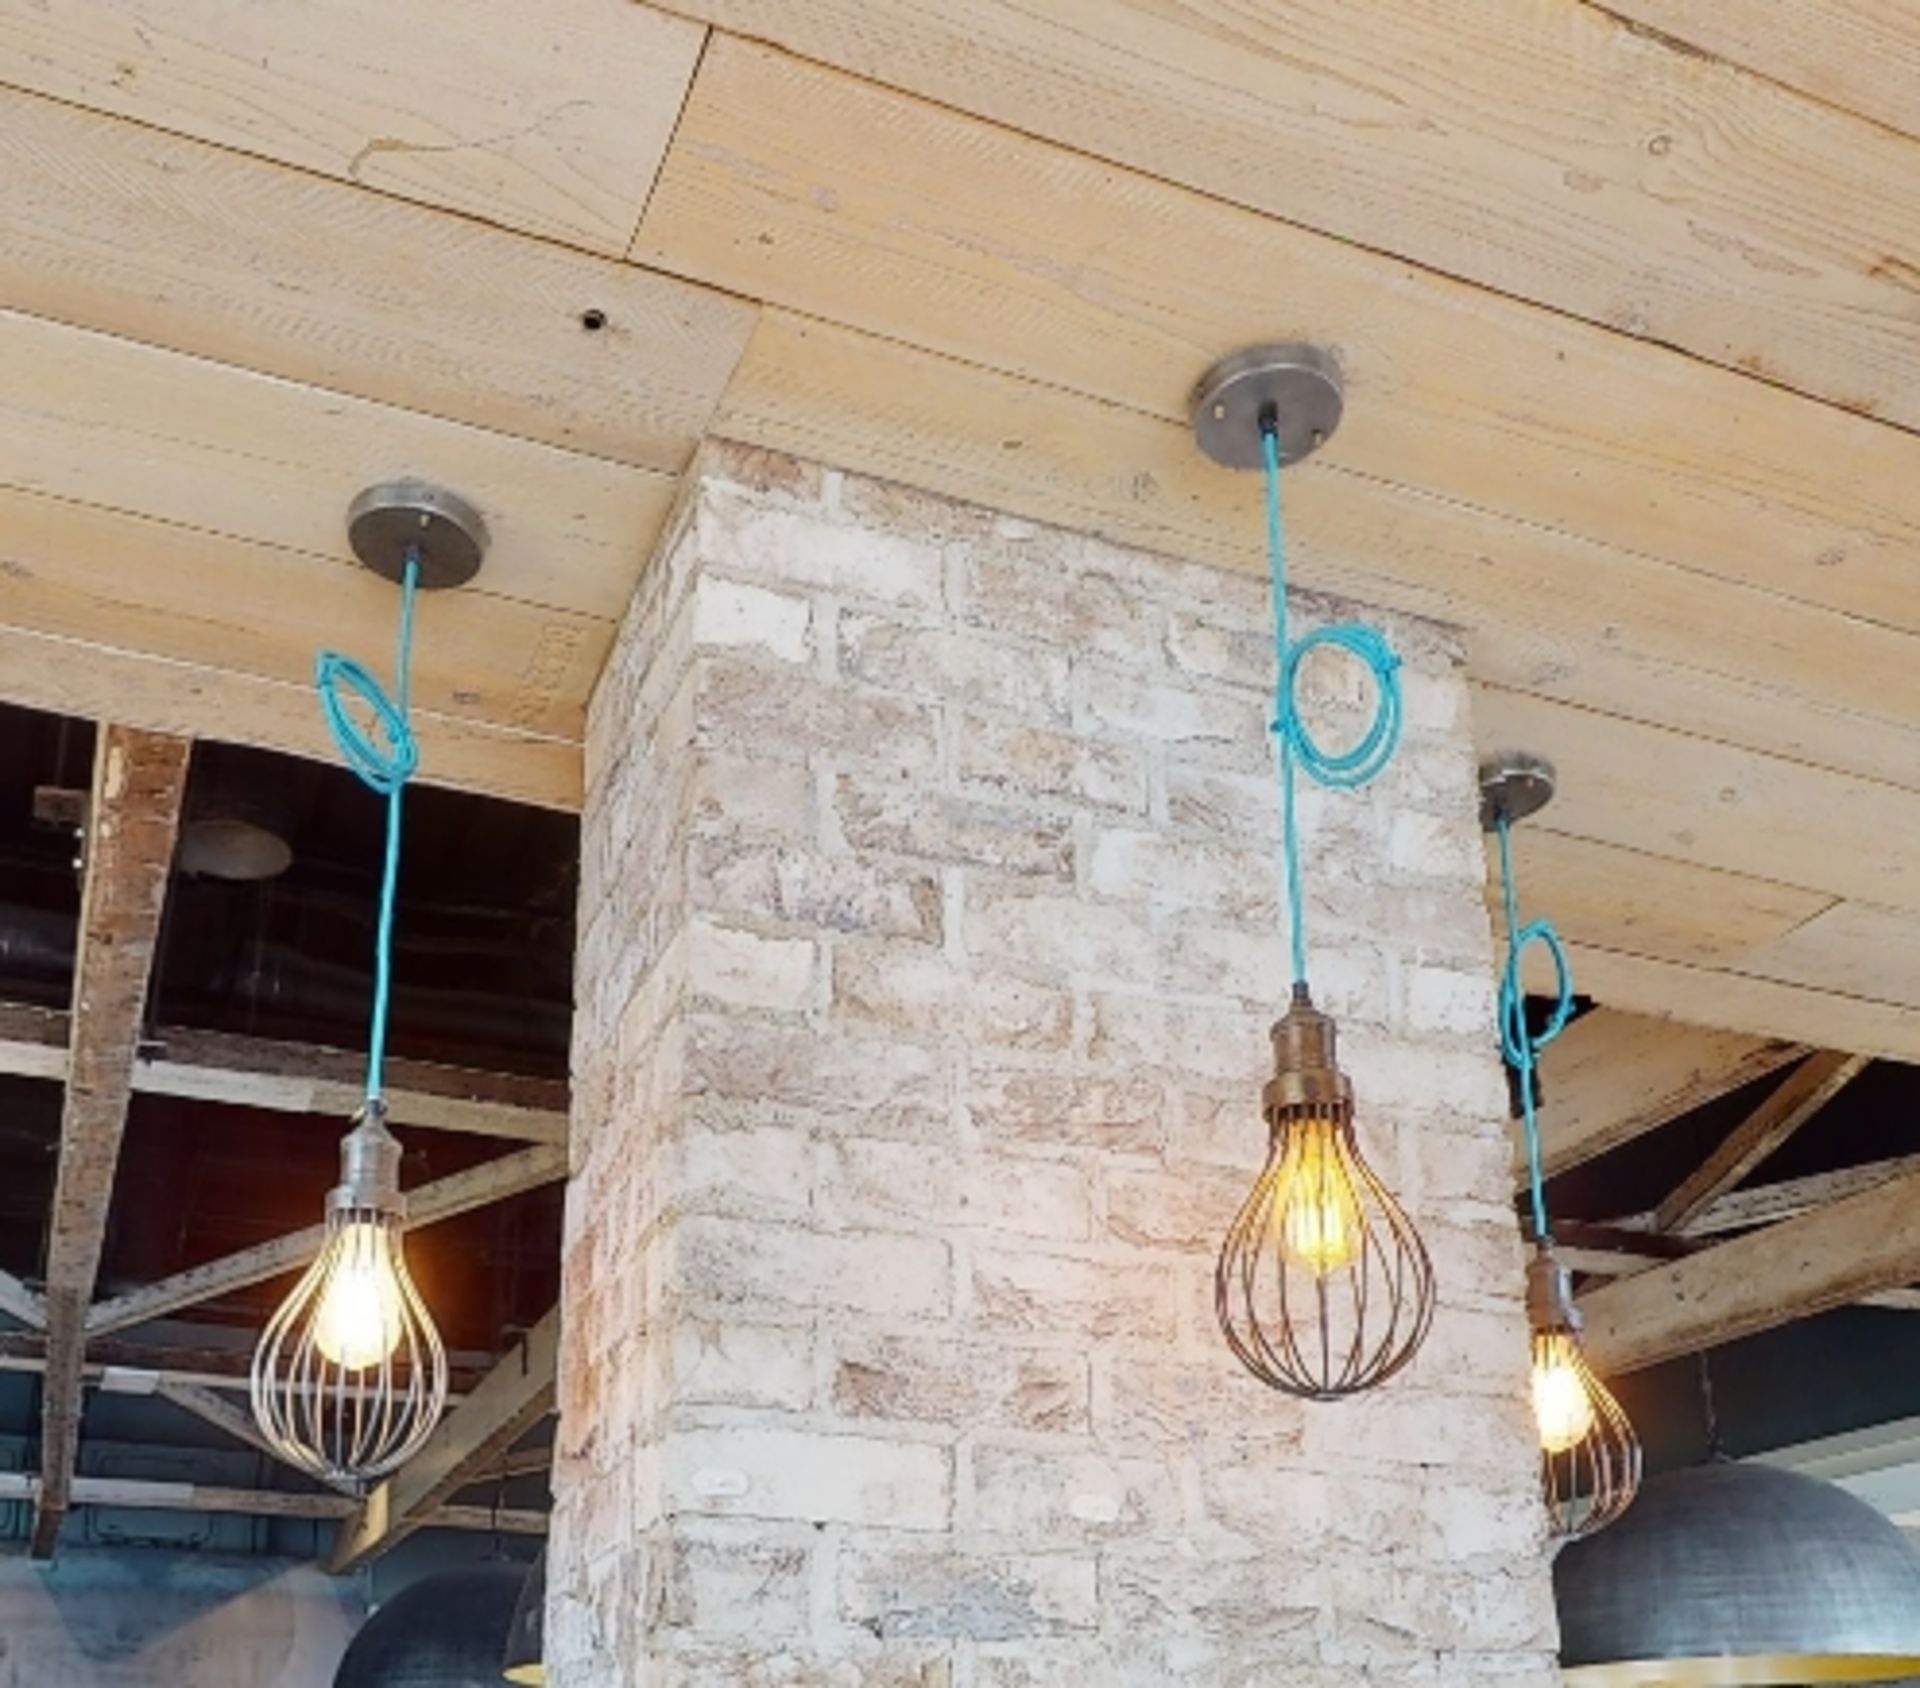 5 x Suspended Rope Lights With Blue Rope Cable, Antique Copper Cage Pendants and Ceiling Mounts